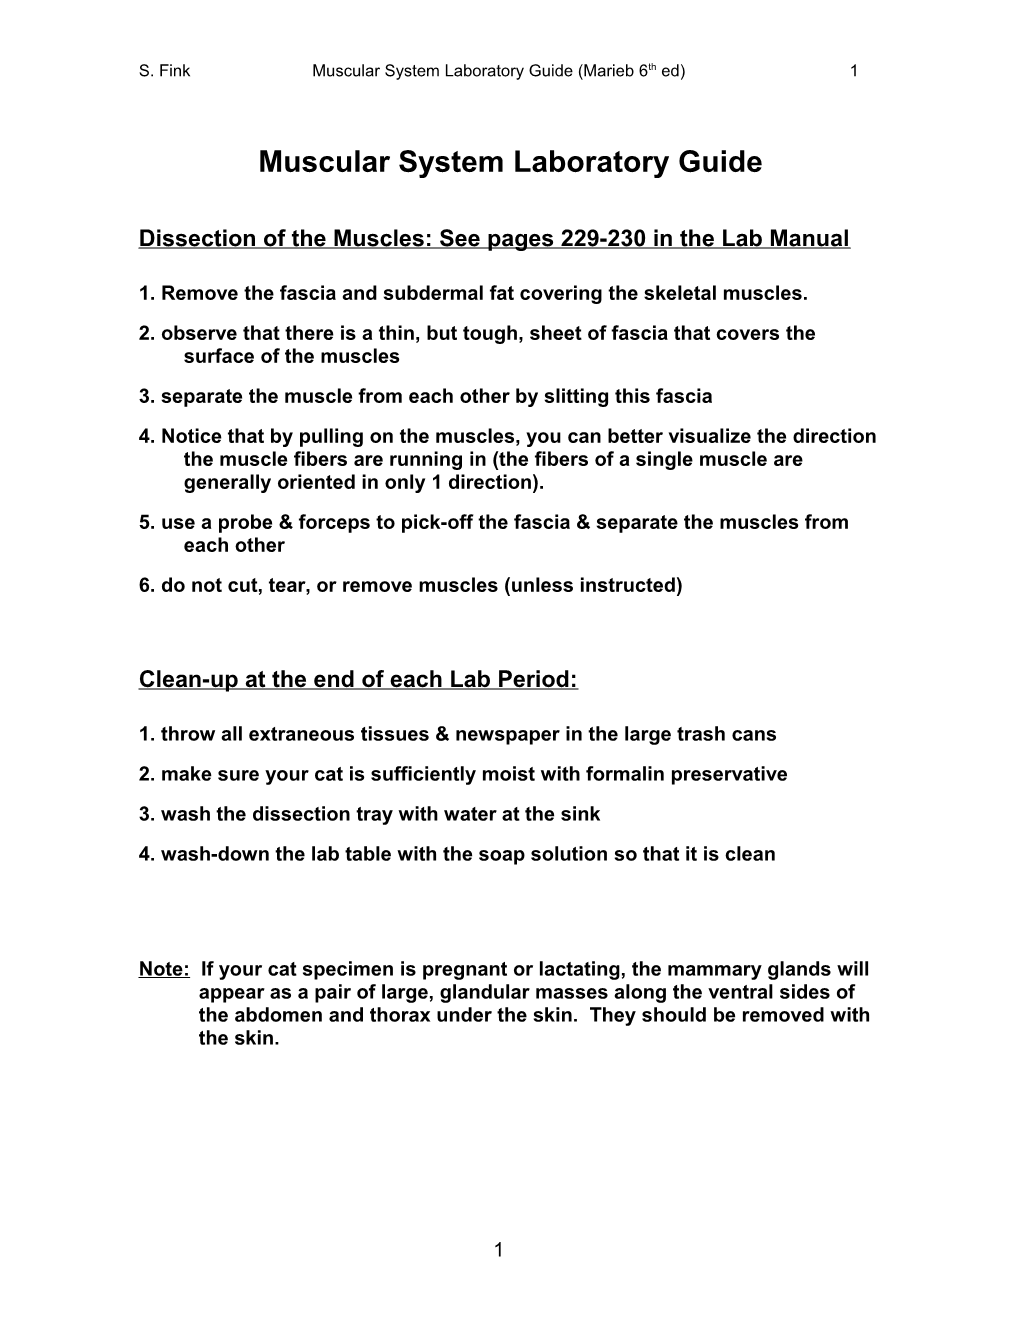 Muscular System Laboratory Guide